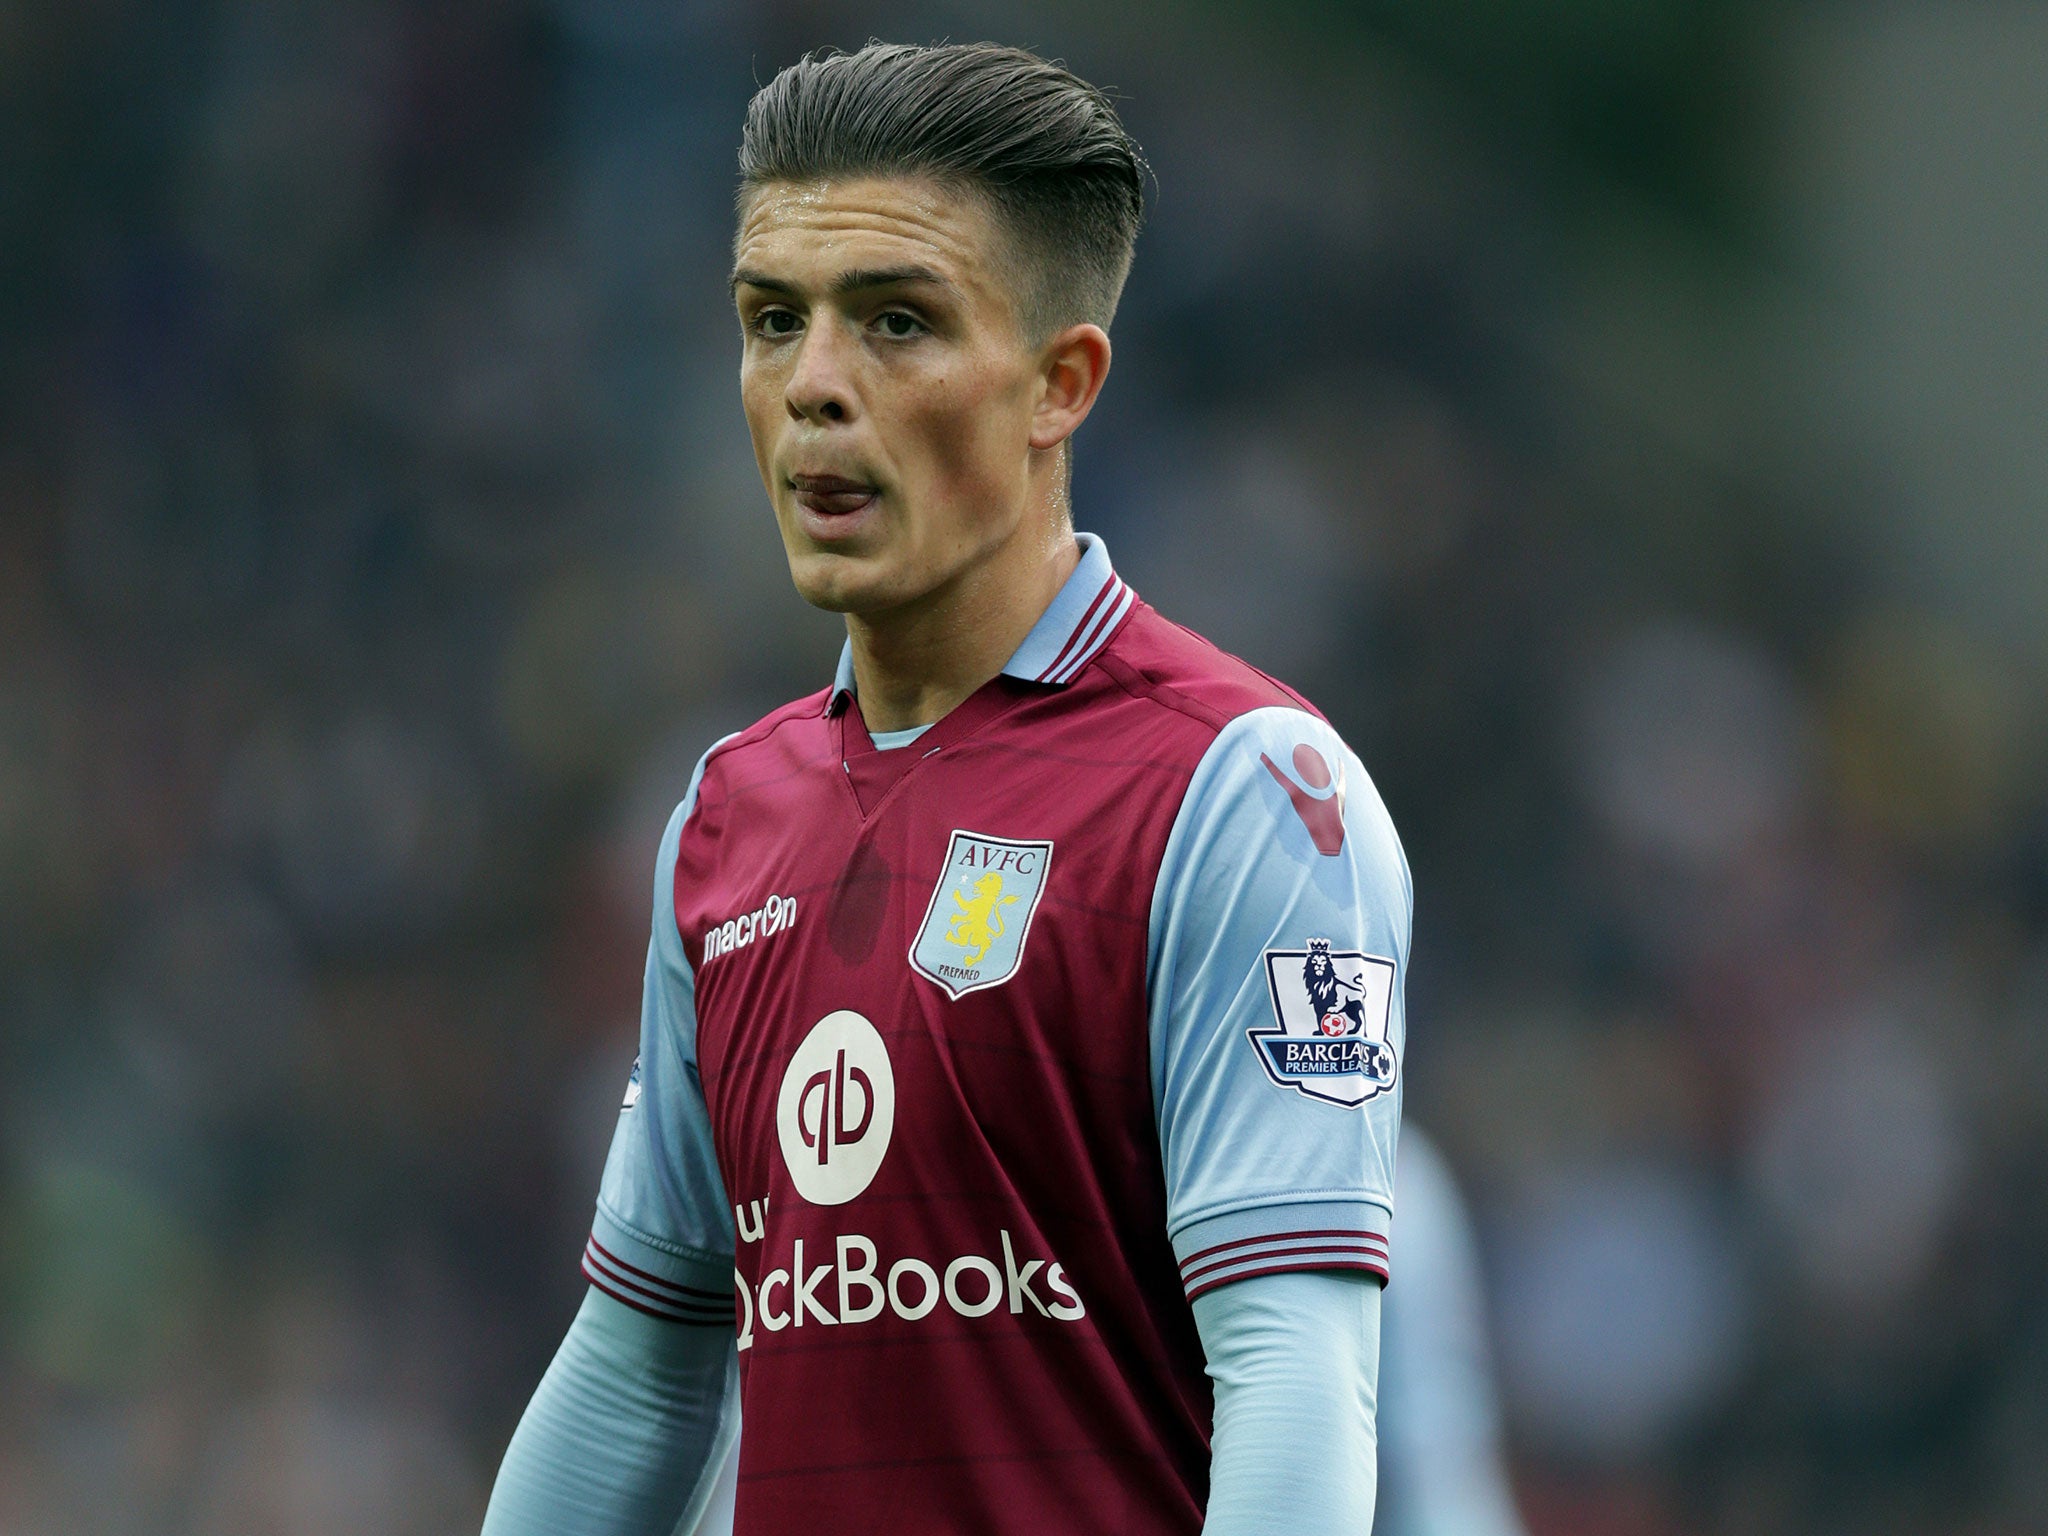 Jack Grealish has been banished from Aston Villa's first-team squad